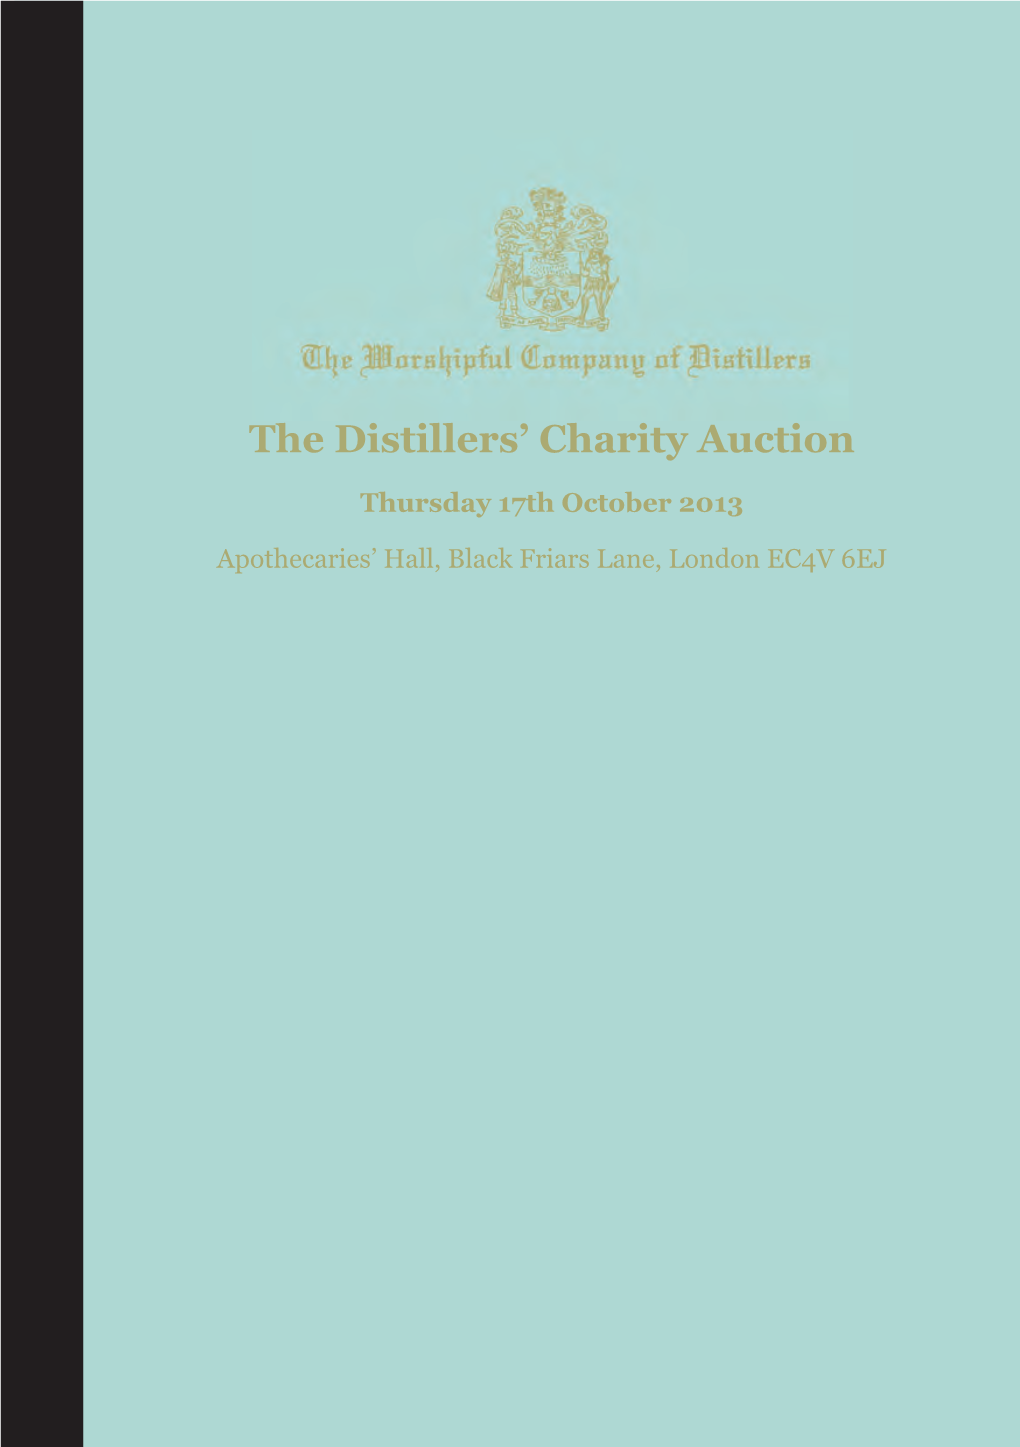 The Distillers' Charity Auction